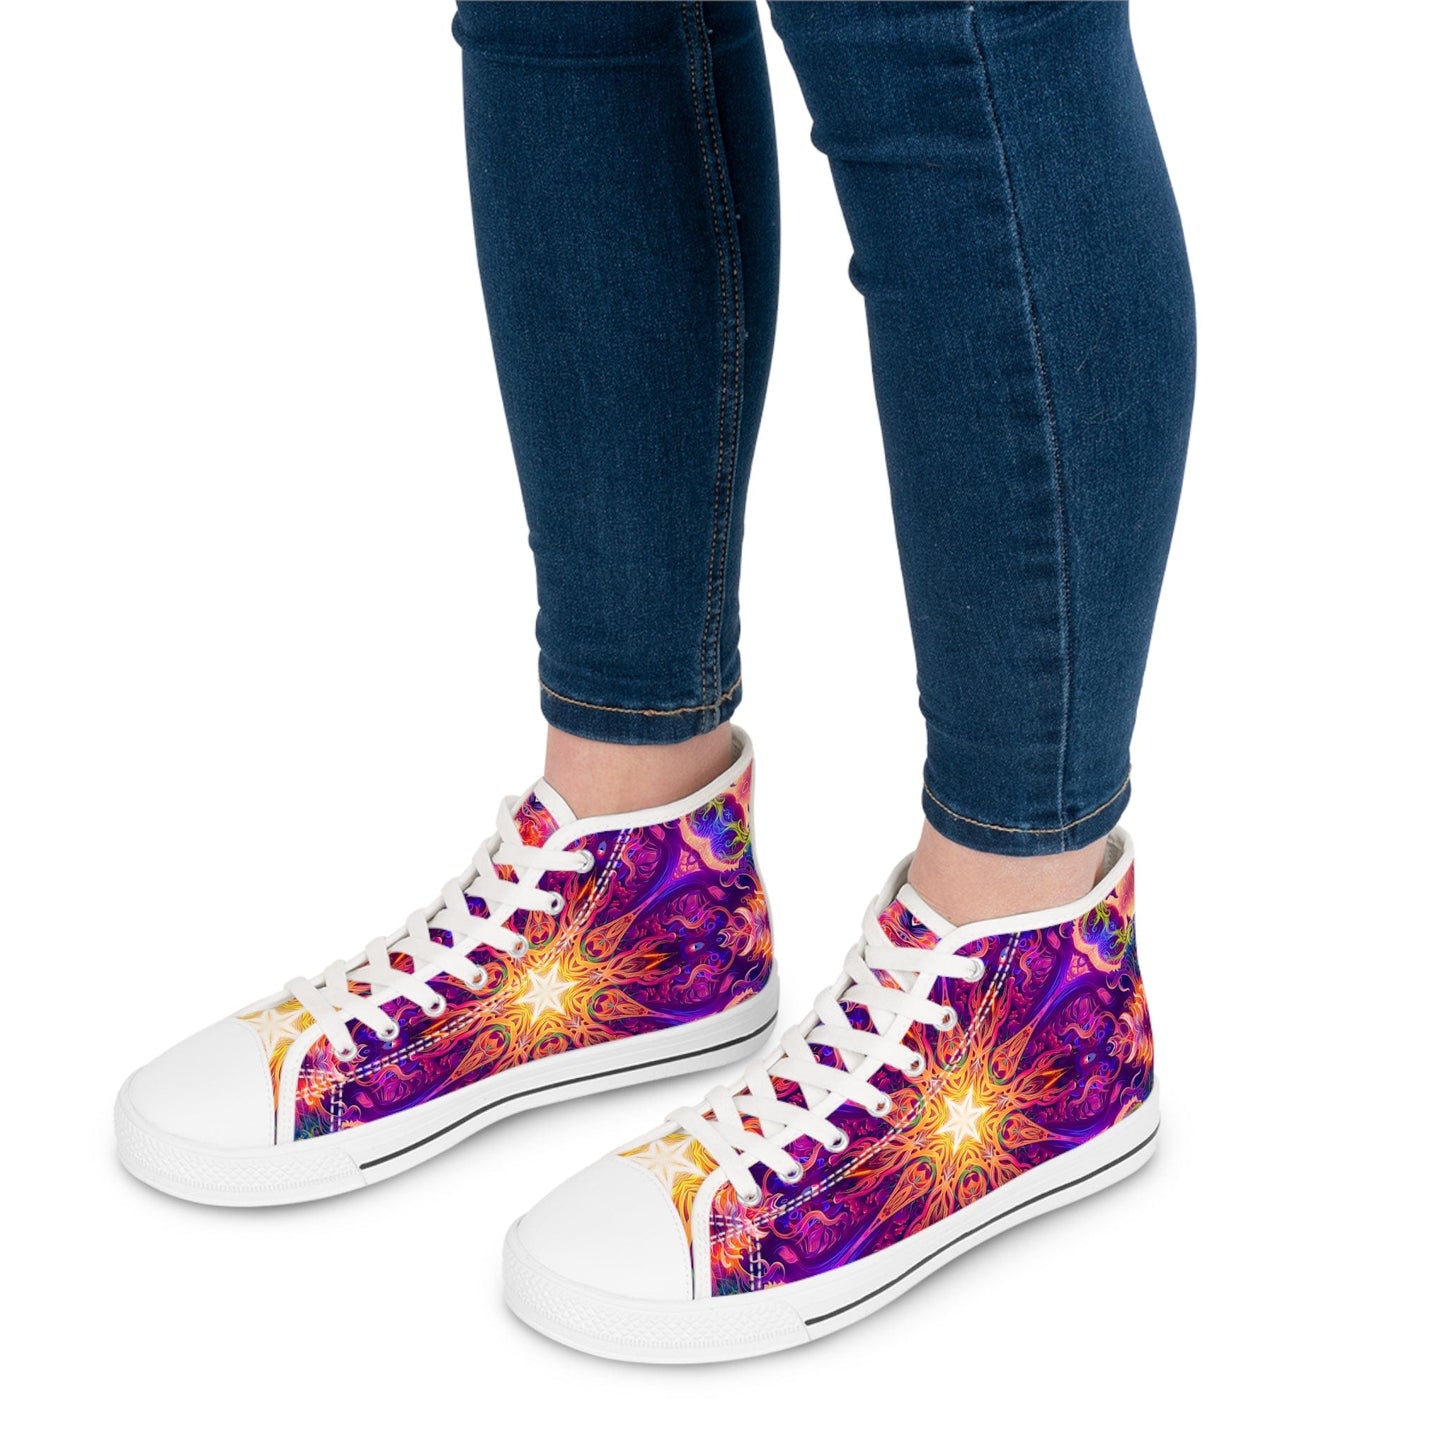 "The Sacred Circle" WOMEN'S HIGHT TOP SNEAKERS